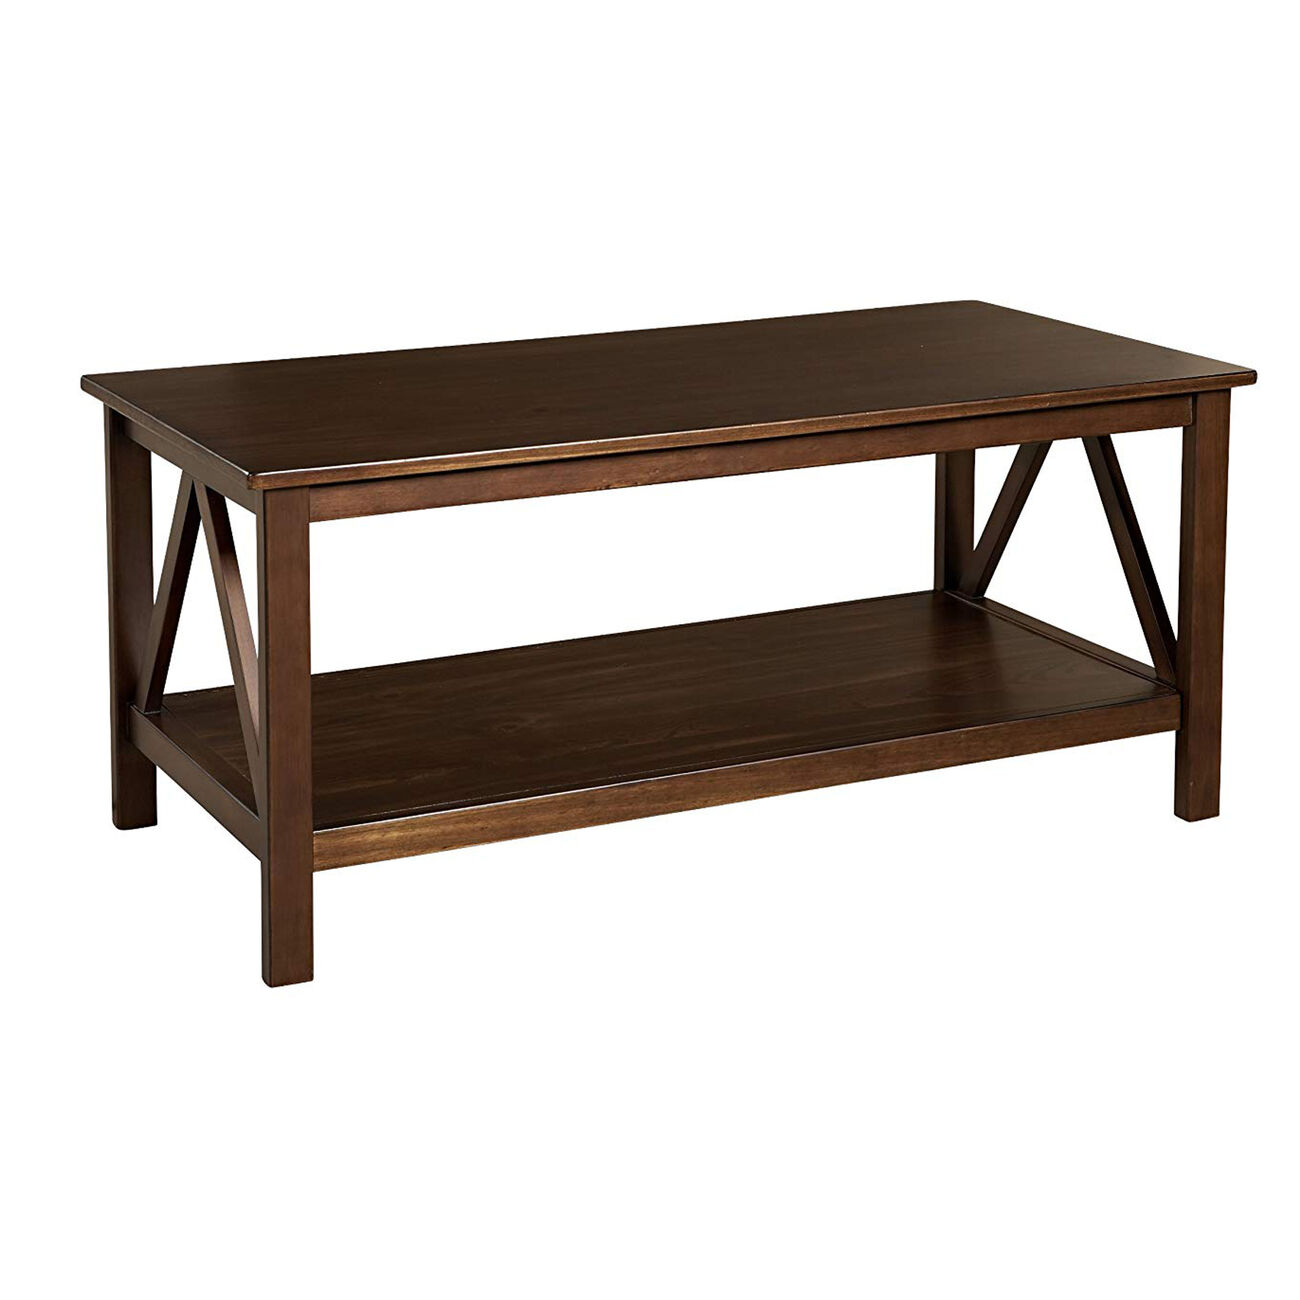 Wooden Rectangular Coffee Table with Inverted V Design Sides, Brown